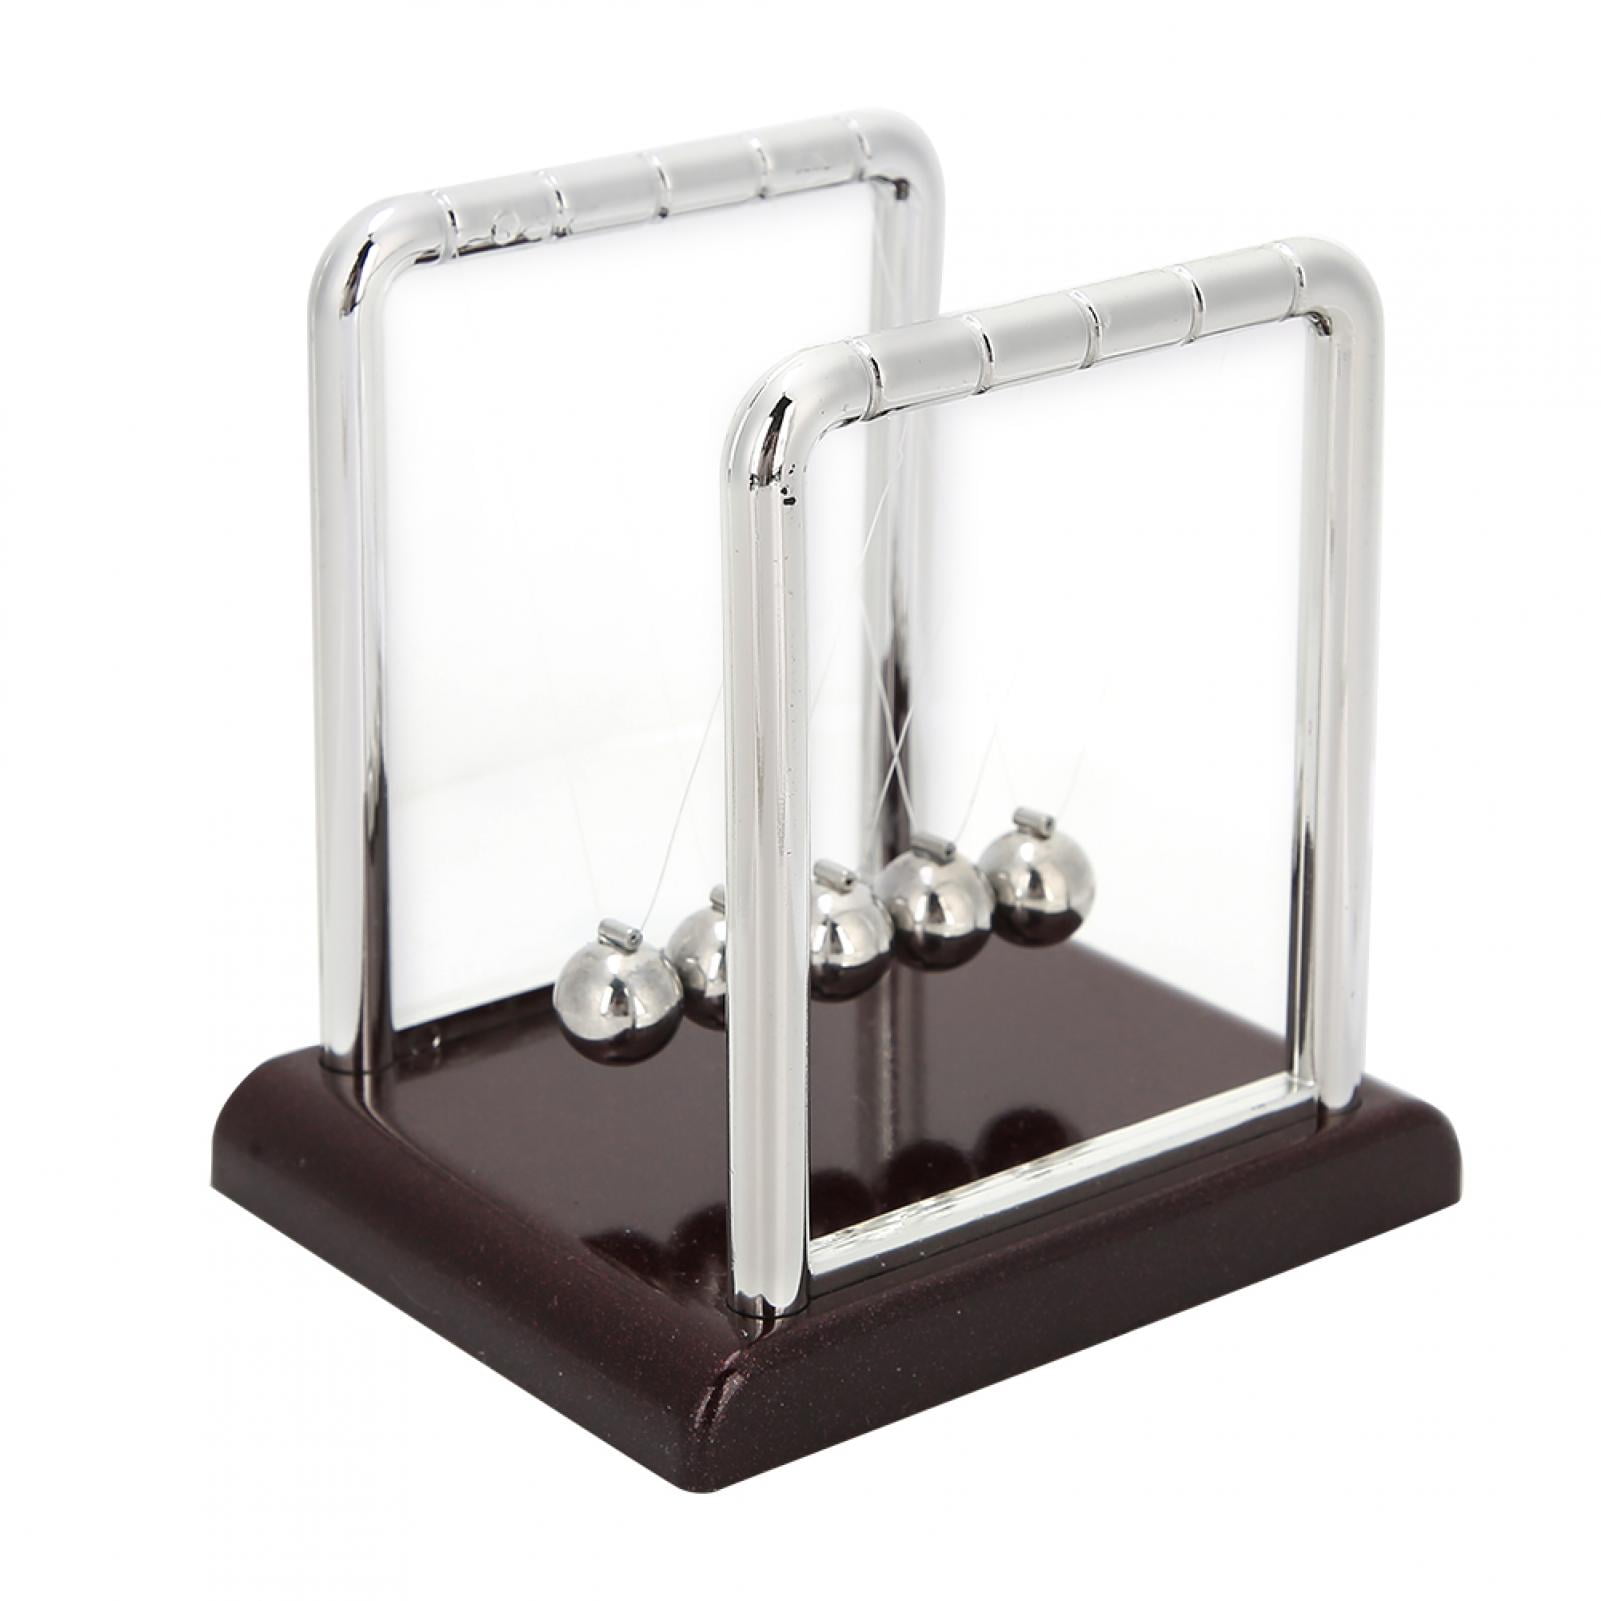 Details about   Metal Balanced Ball Toy Desk Physics Science Educational Toys Table Decoration 